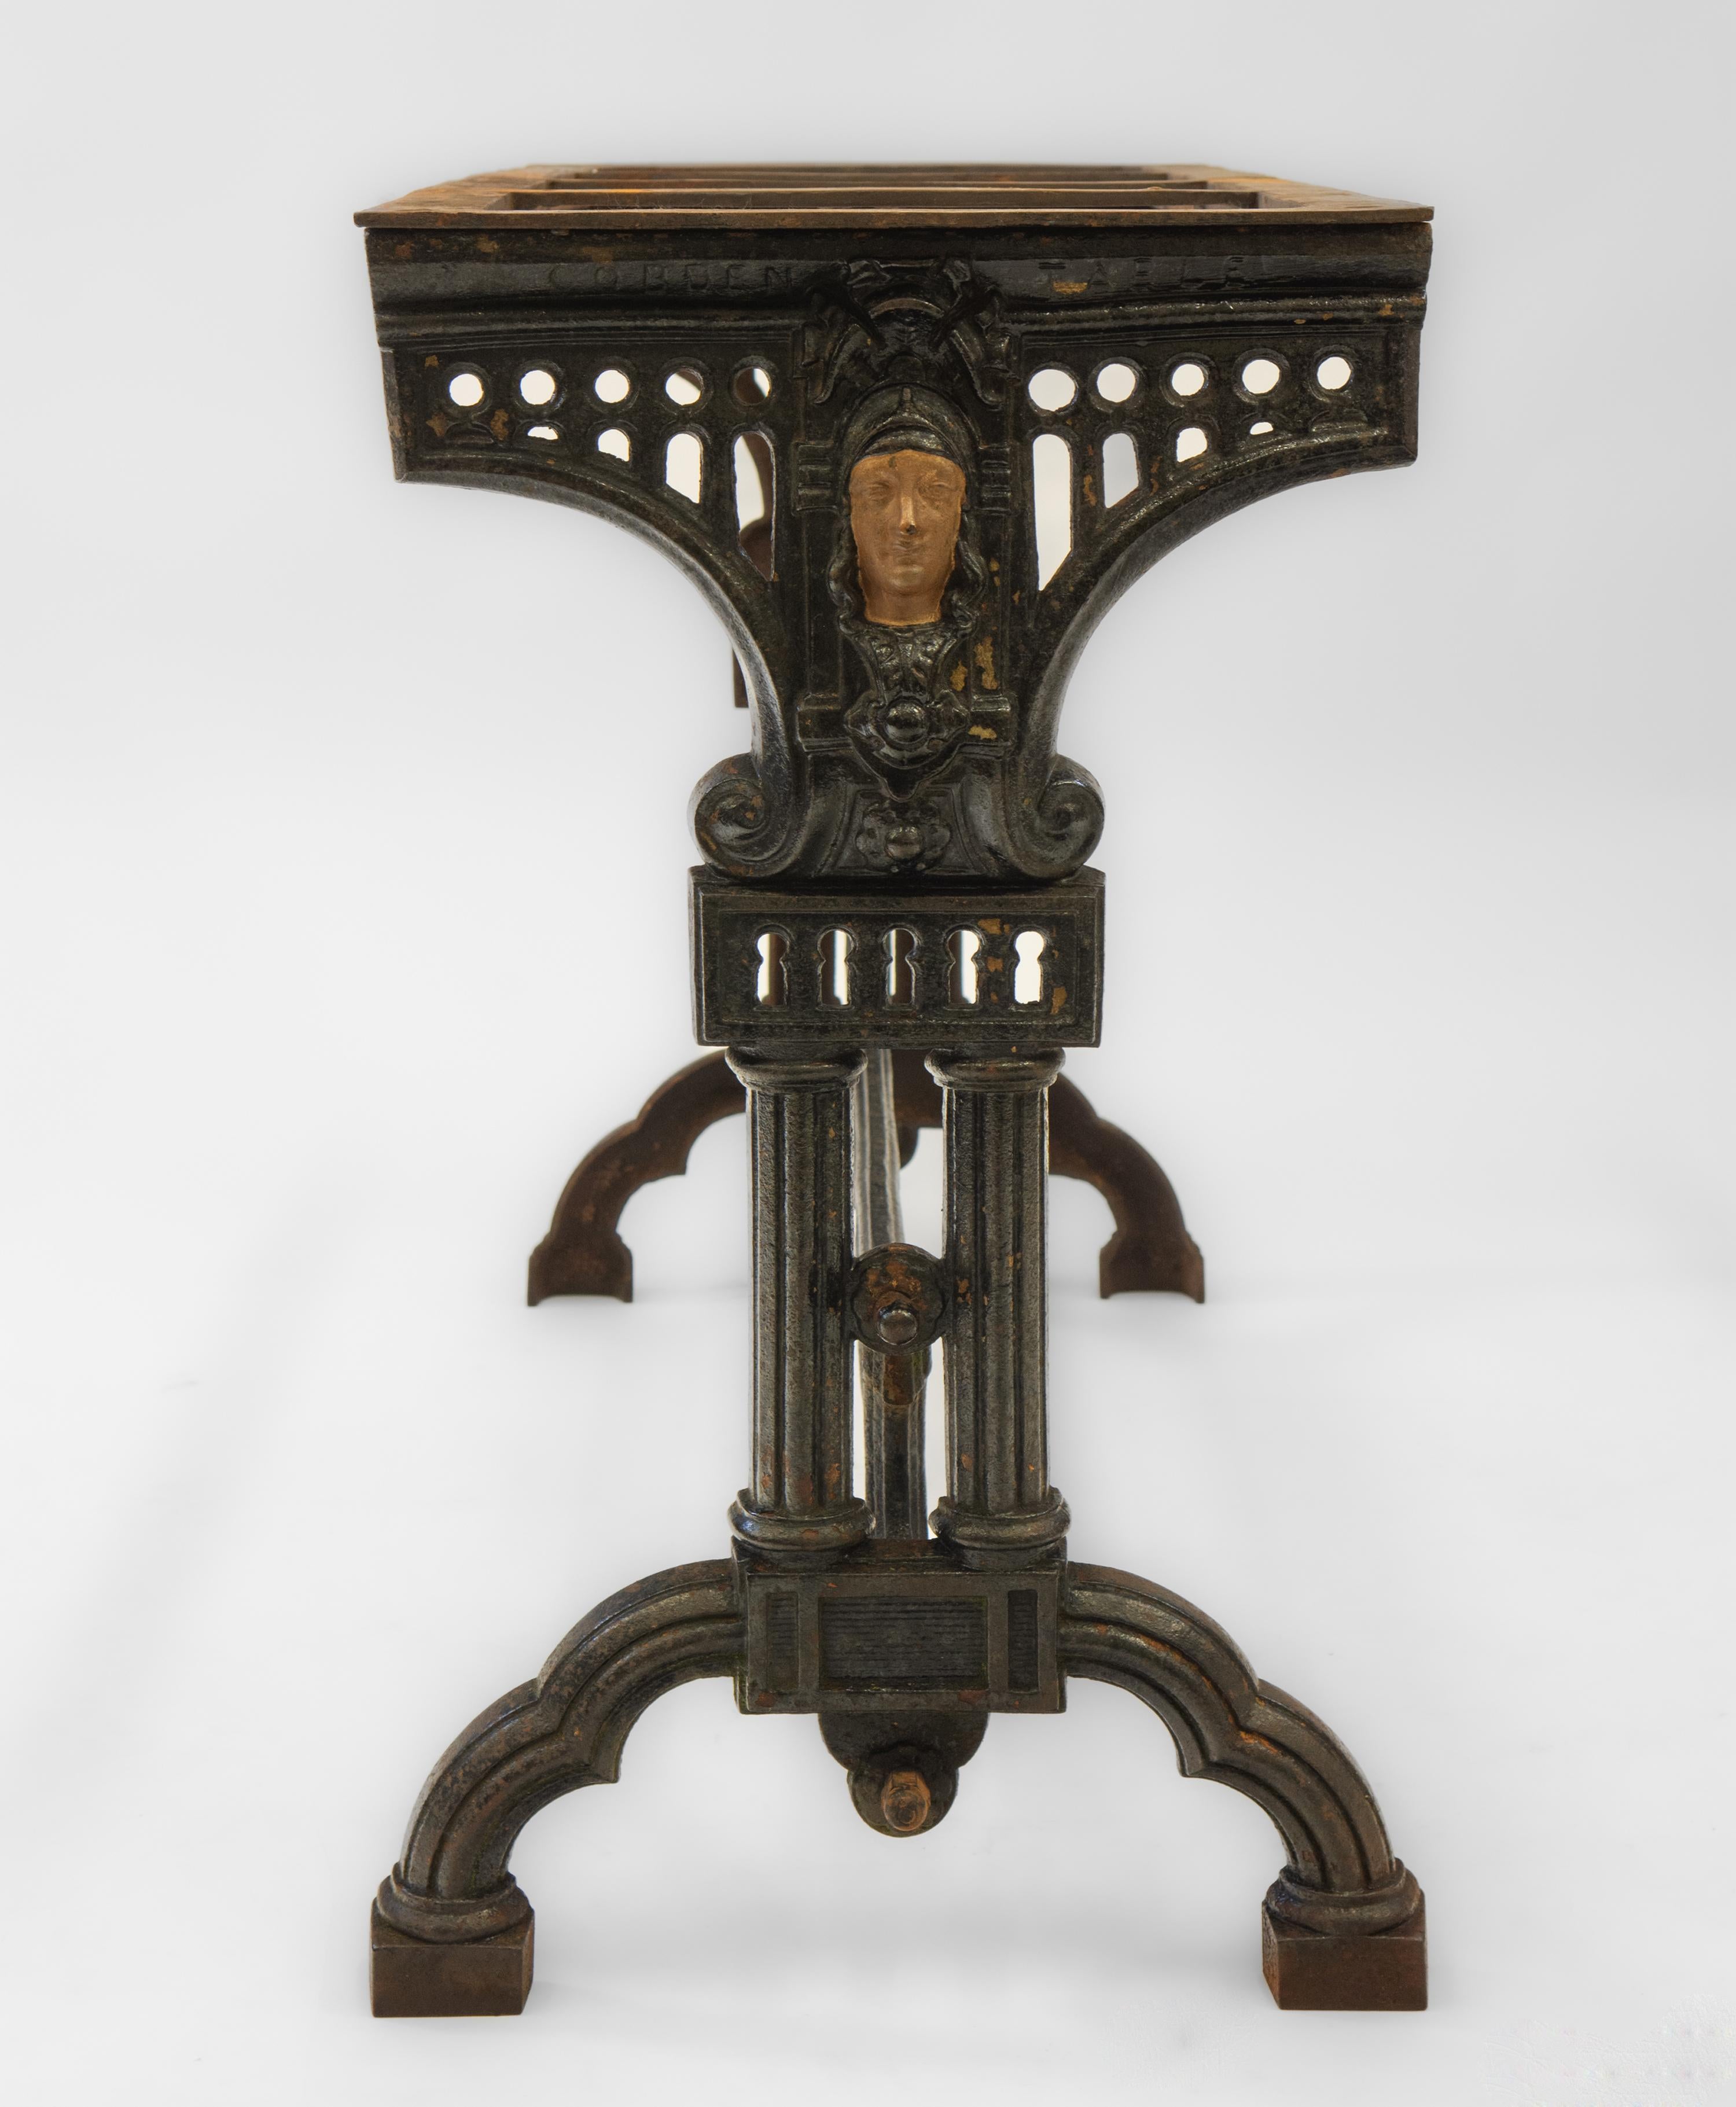 19th century cast iron garden/conservatory rectangular table base. English, circa 1870. Stamped 'Cobden Table' along with a patent number. 

A very well cast table base, depicting Britannia on each end between scrolls, with keyhole piercings below.